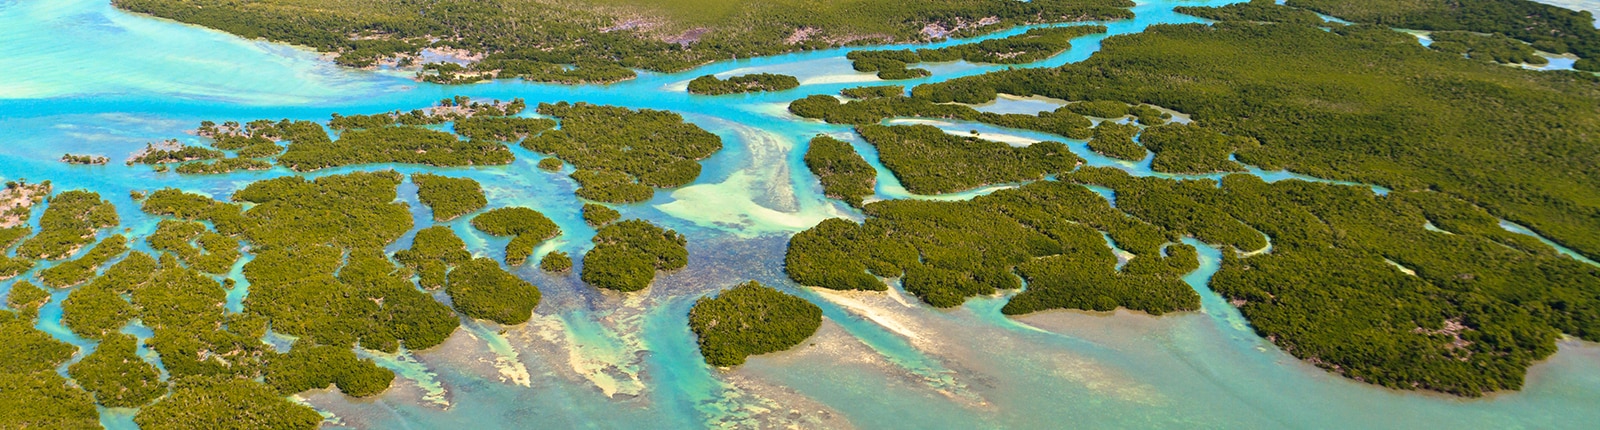 Beautiful aerial  shot of the mangroves of Key West